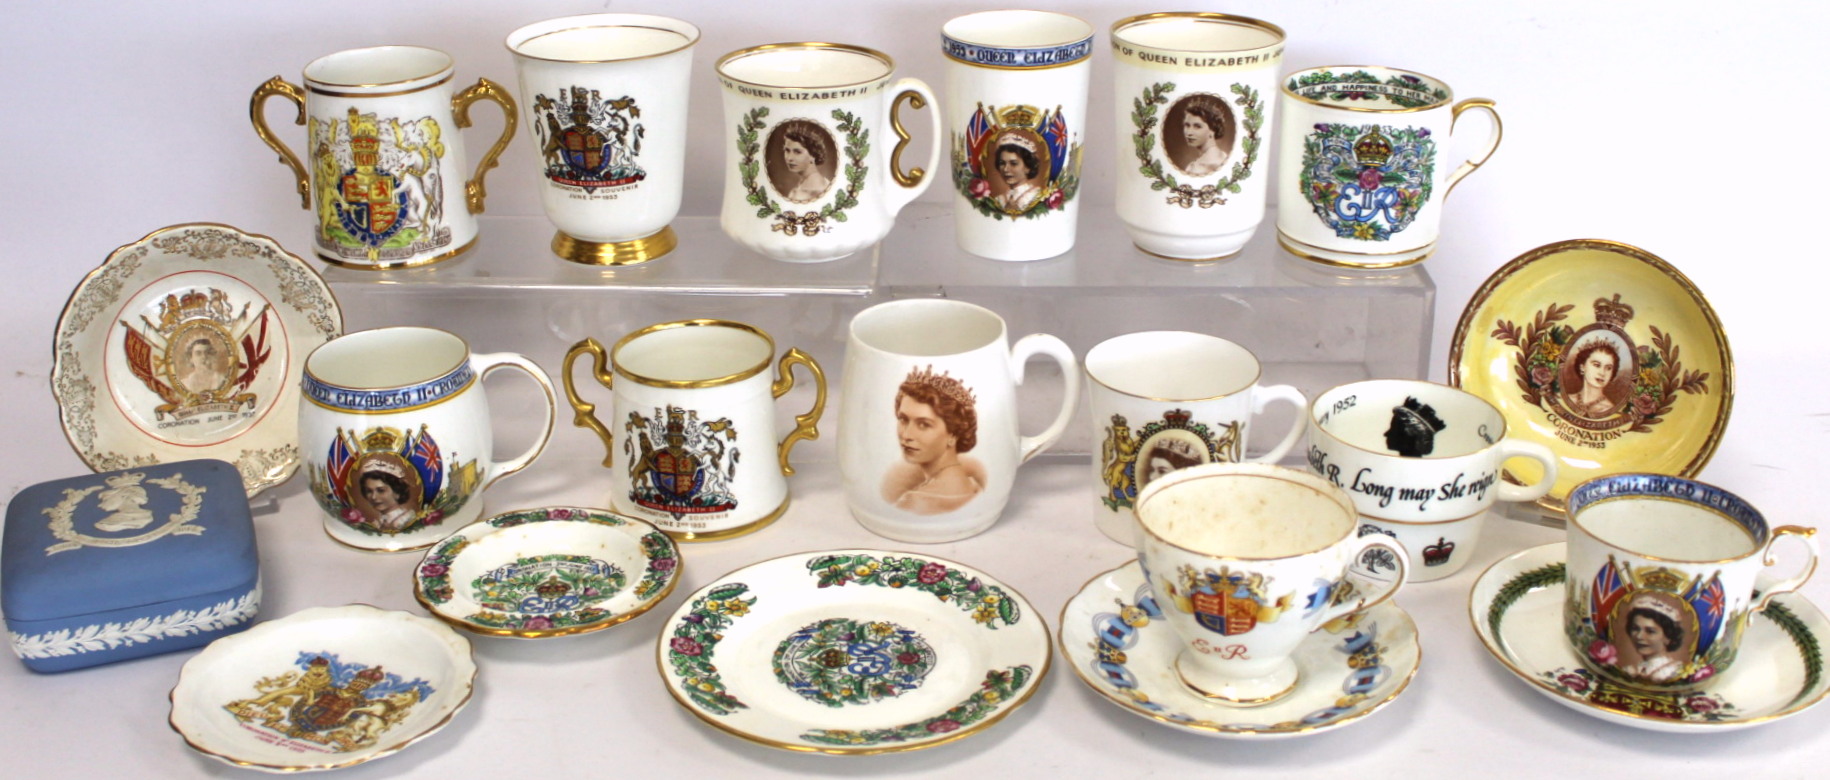 Coronation of Elizabeth II 1953, a collection of various commemorative mugs, loving cups, dishes,